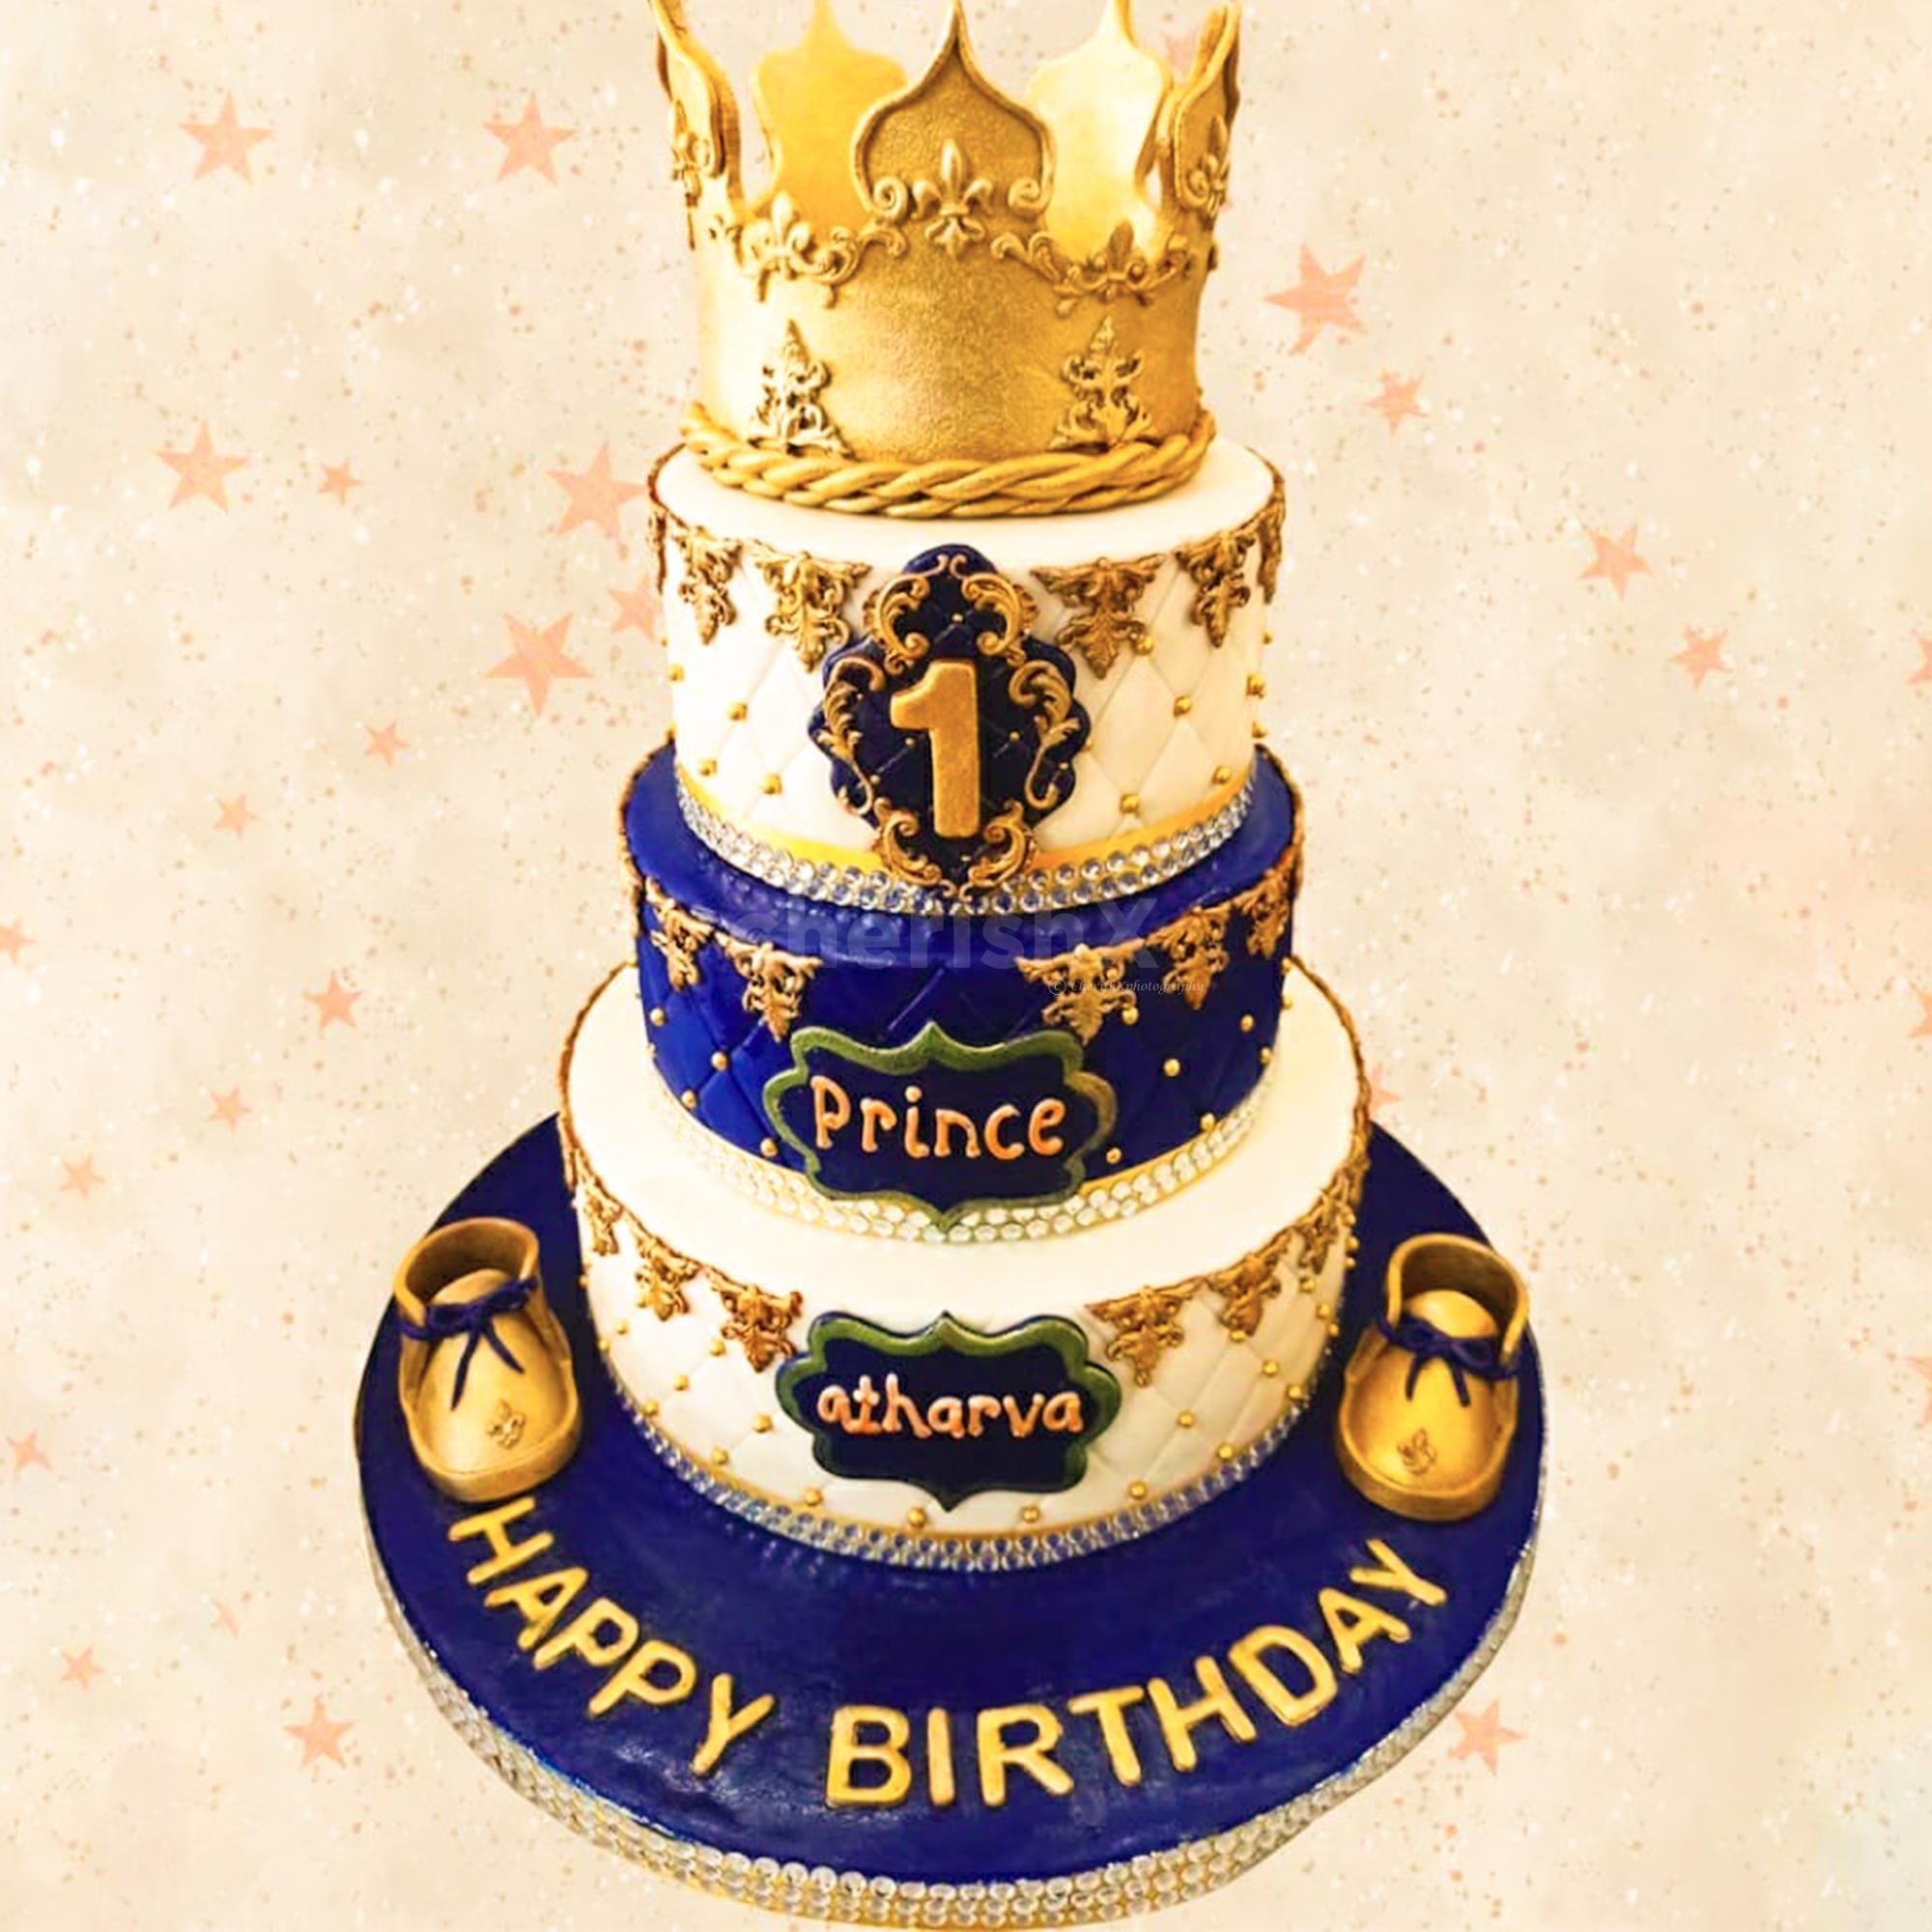 Beyond Cakes - A royal prince theme 1st birthday cake . Top tier being  blueberry and strawberry fusion and bottom tier being mixed fruit .  #birthdaycake #celebrationcakes #princetheme #royalprincecake  #bestofpatiala #customcakes #freshbaked #